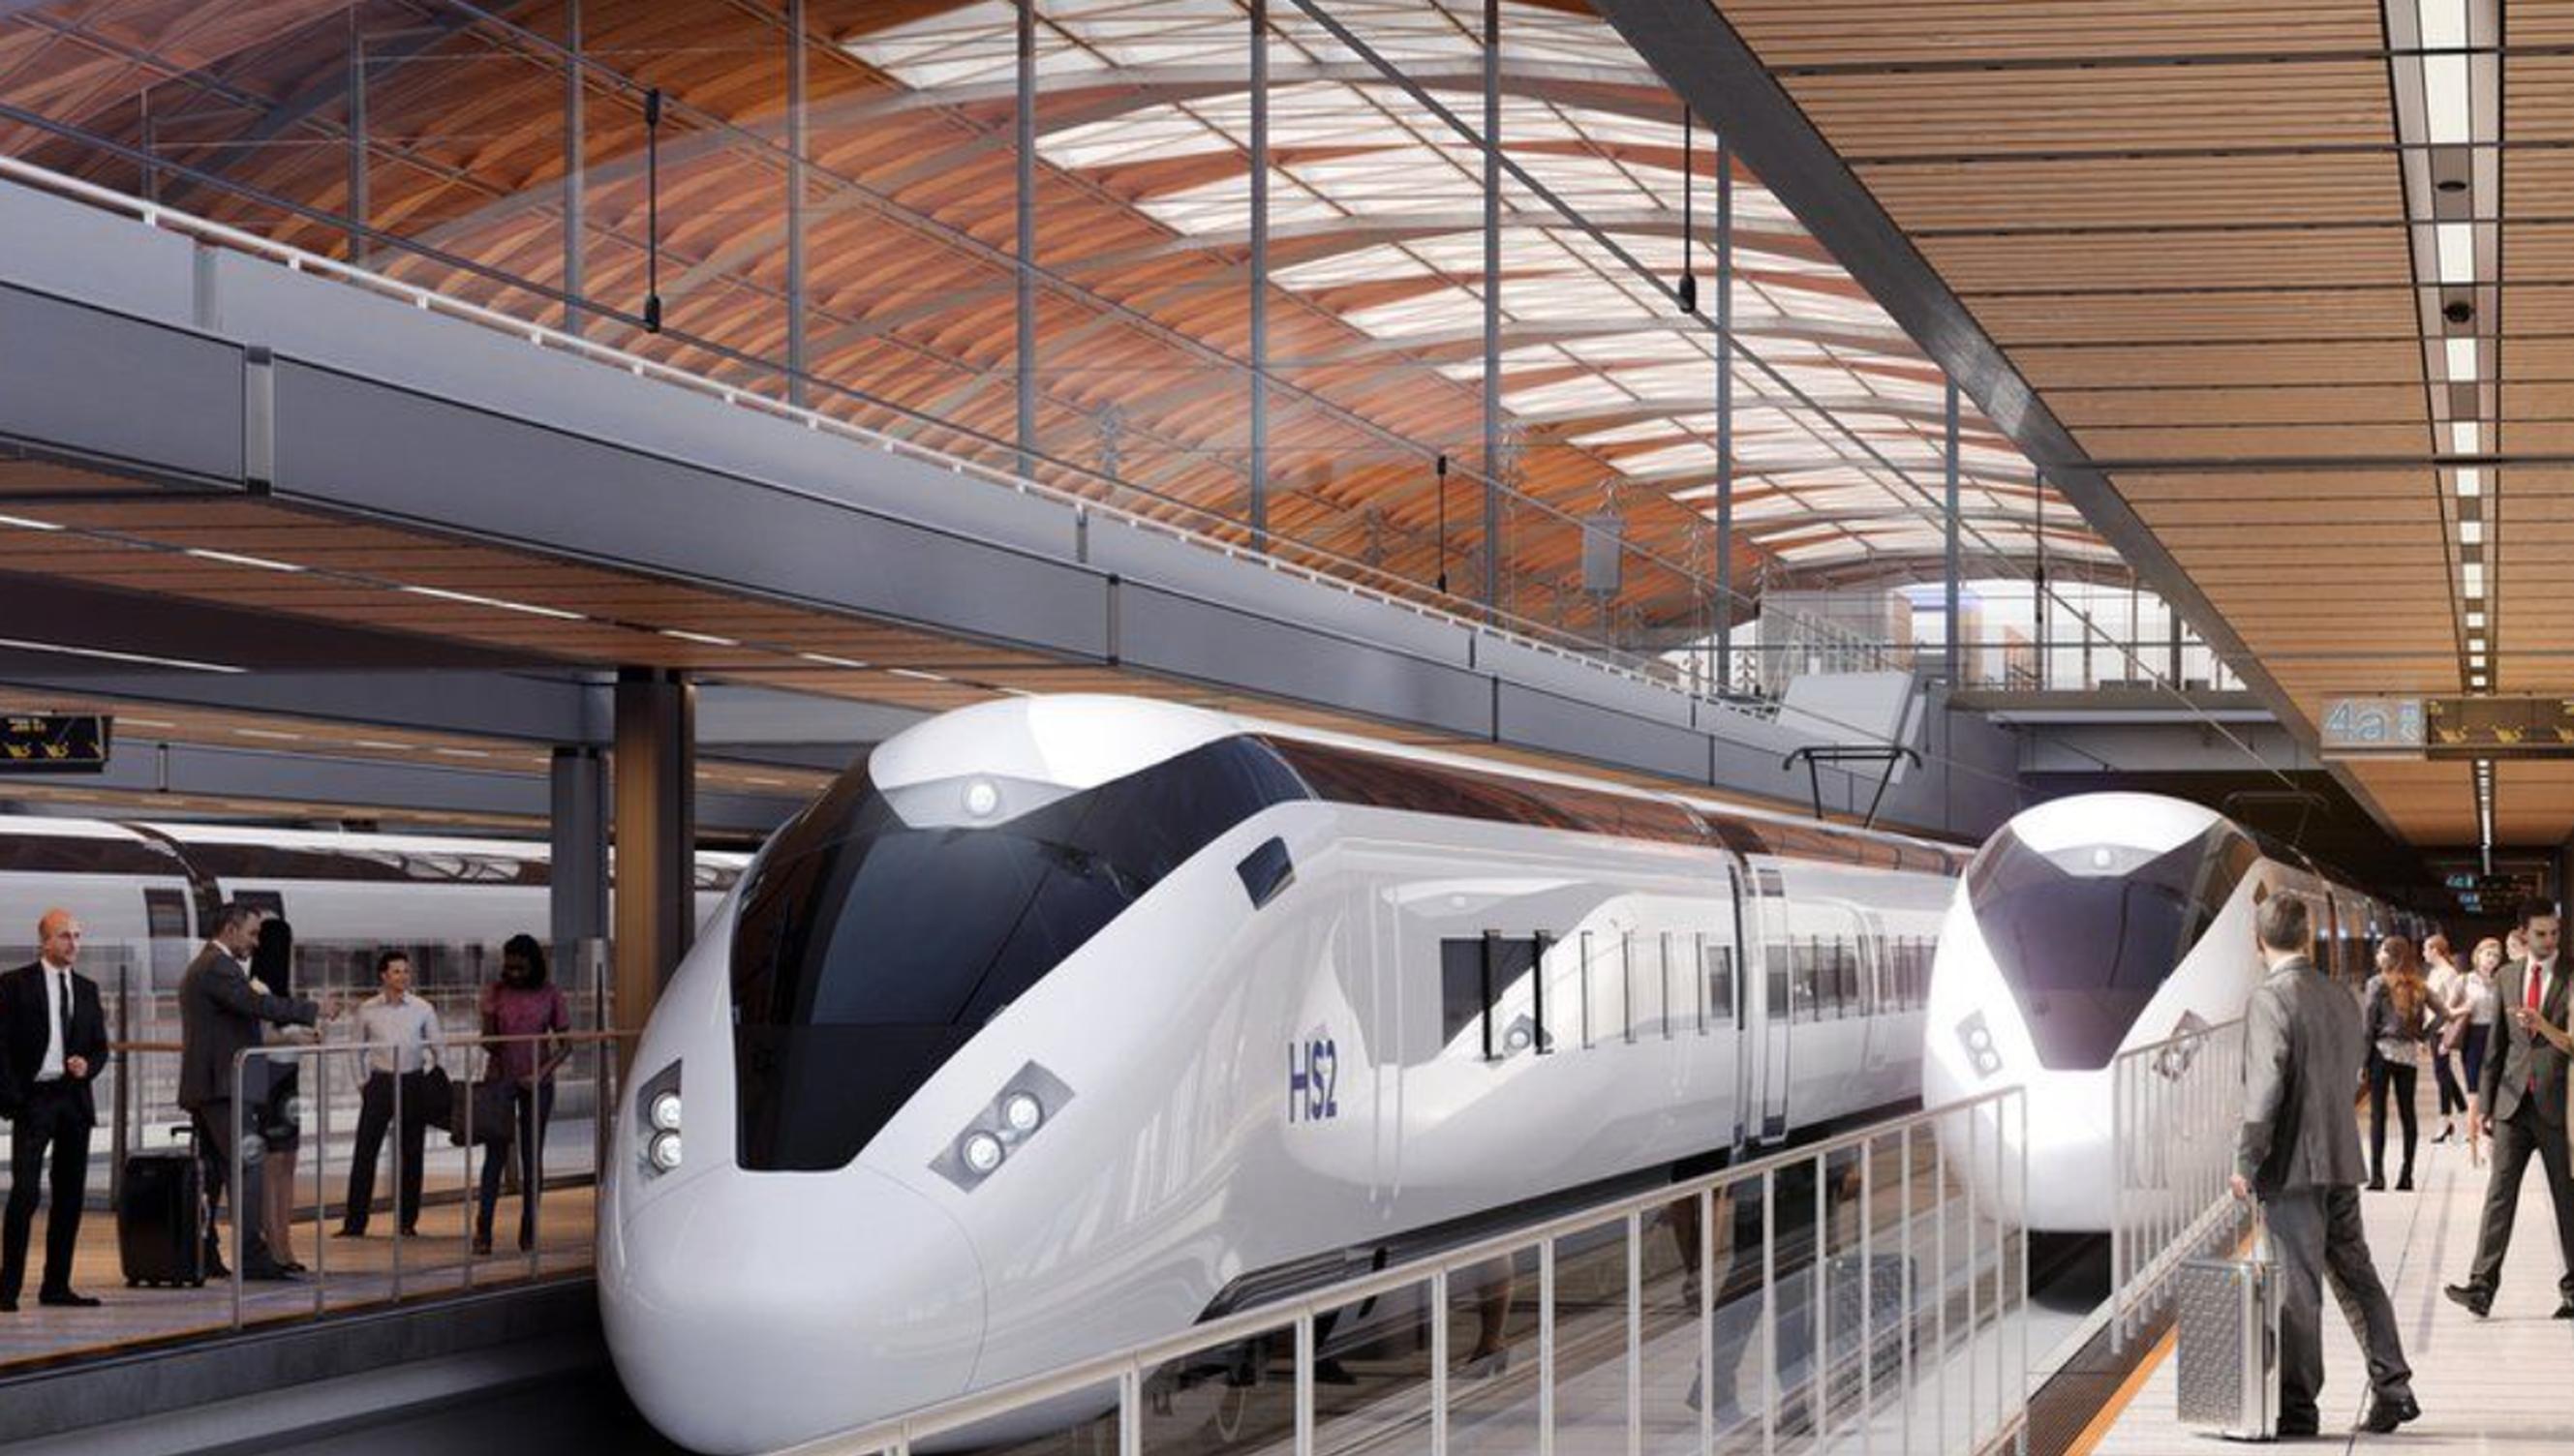 Trains at the planned Curzon Street station in Birmingham (HS2)